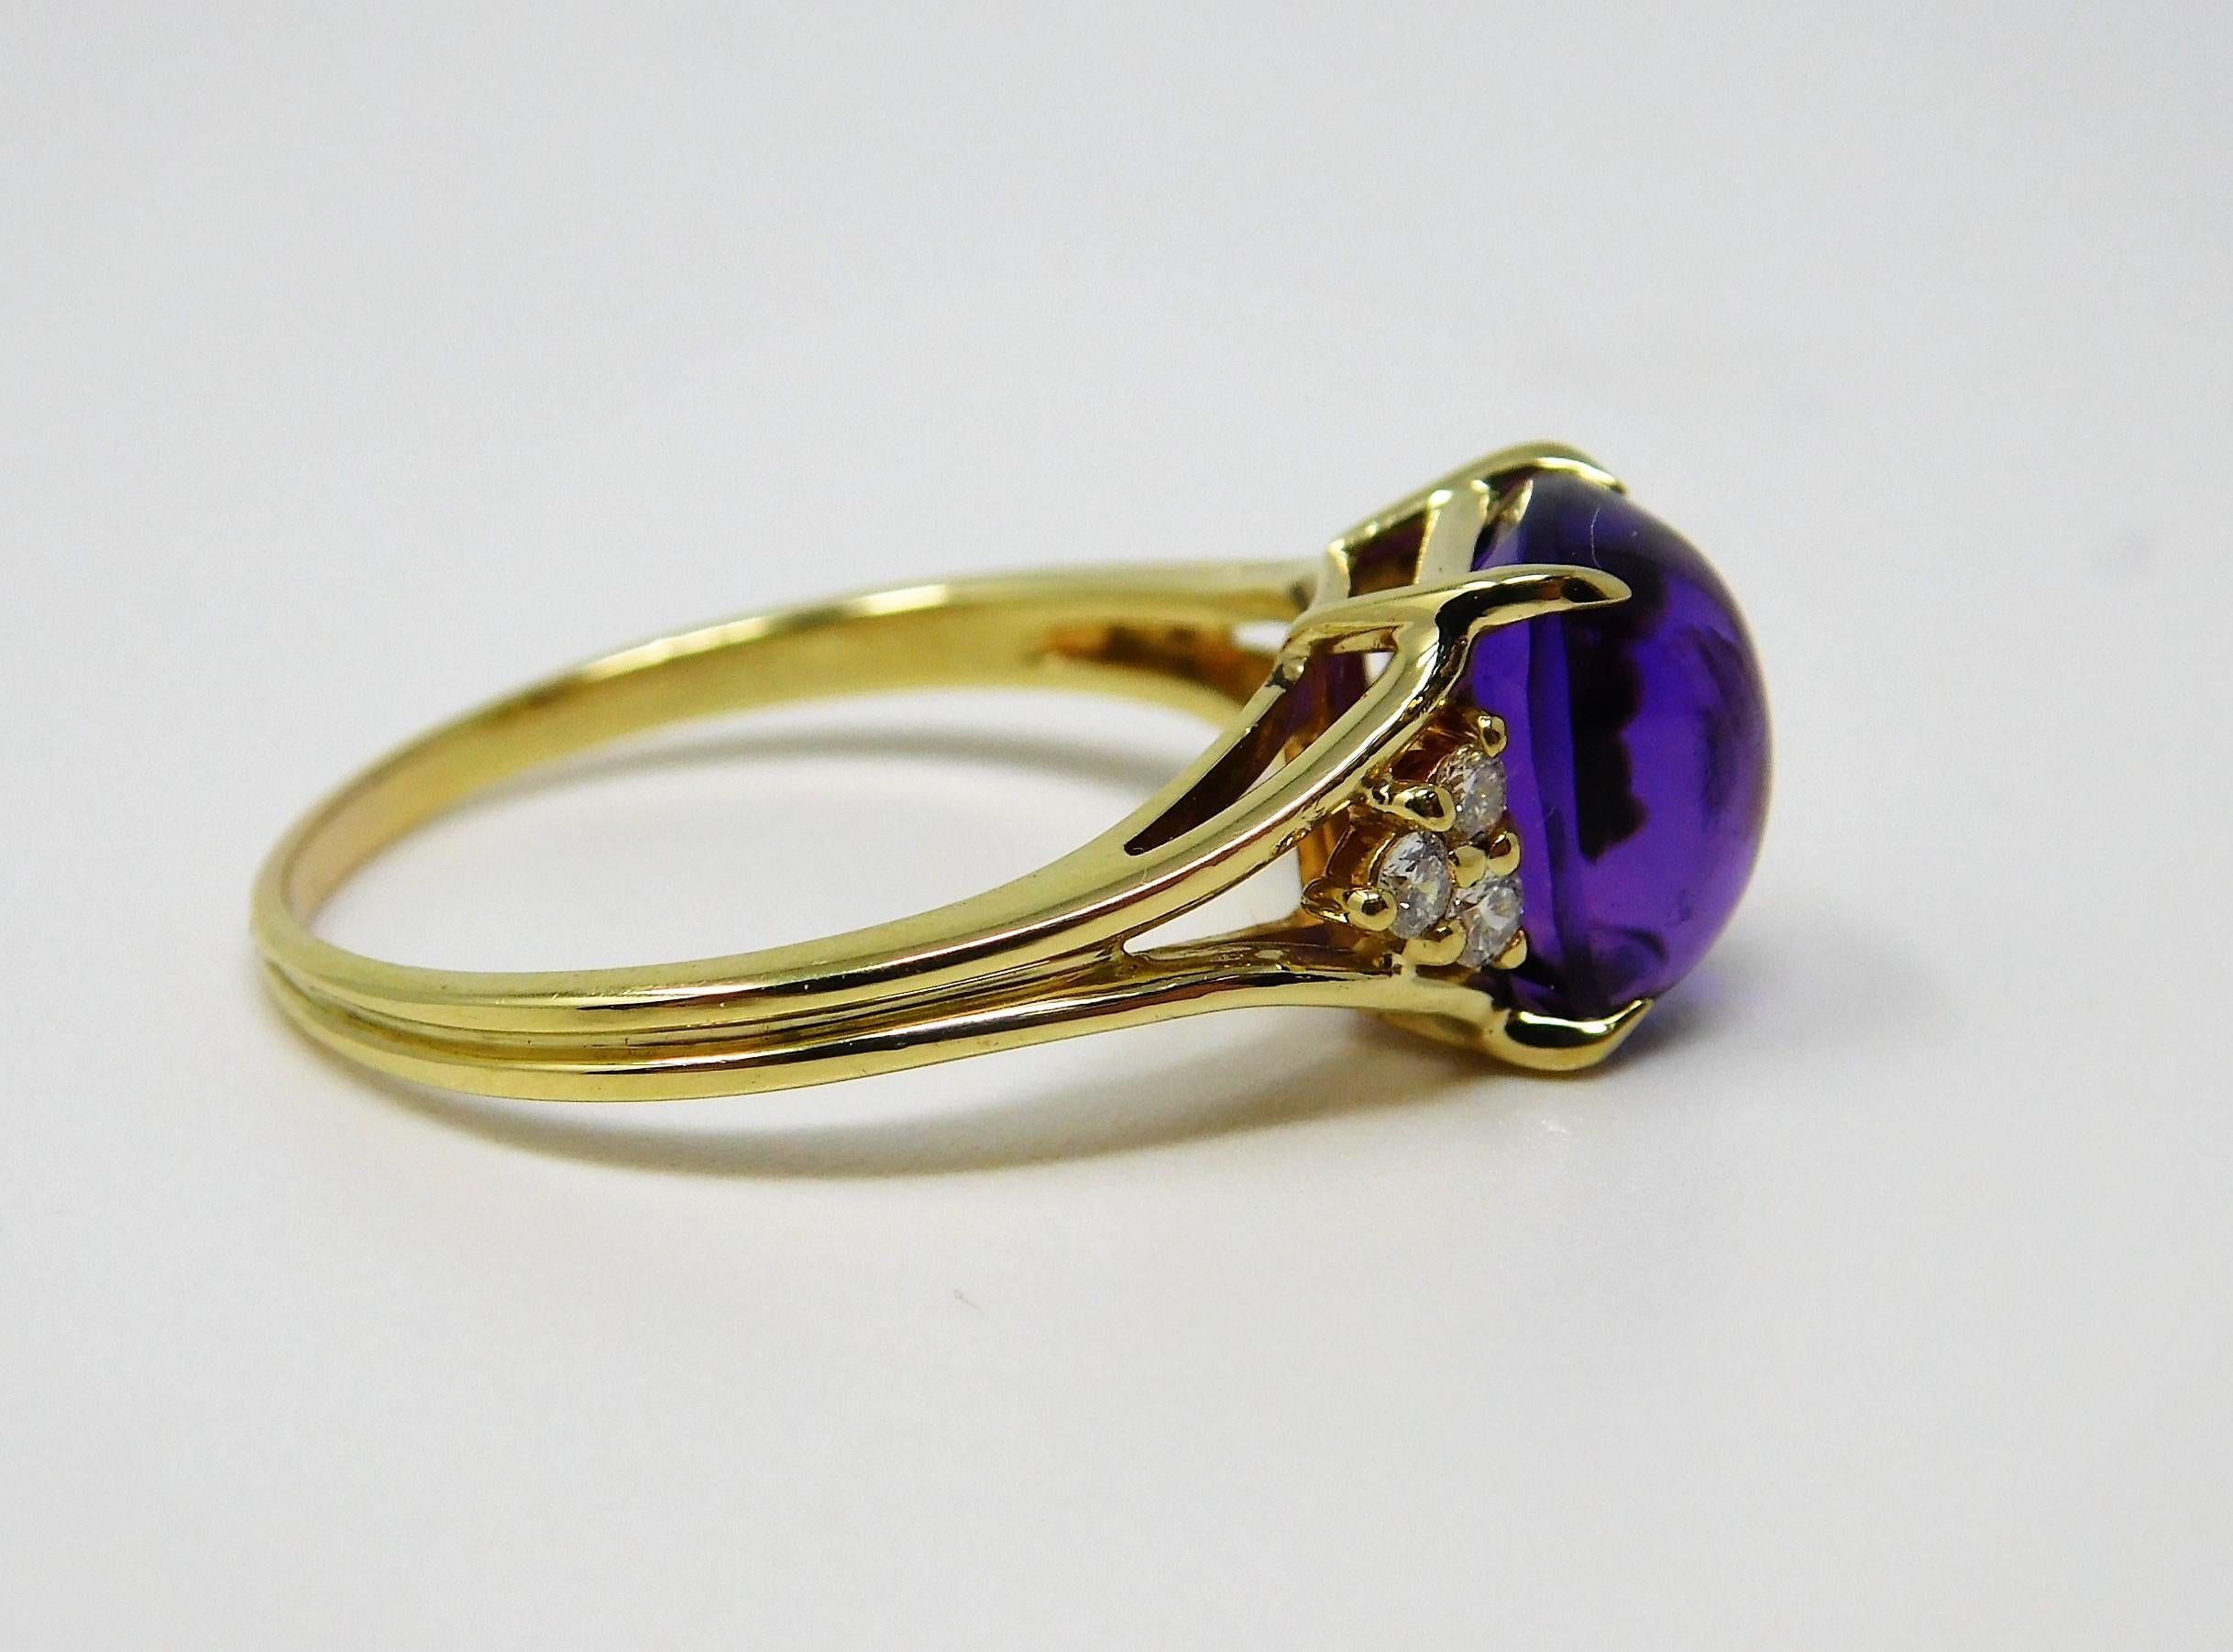 Cabochon Amethyst and Diamond Ring in 18 Karat Gold In Good Condition For Sale In Dallas, TX